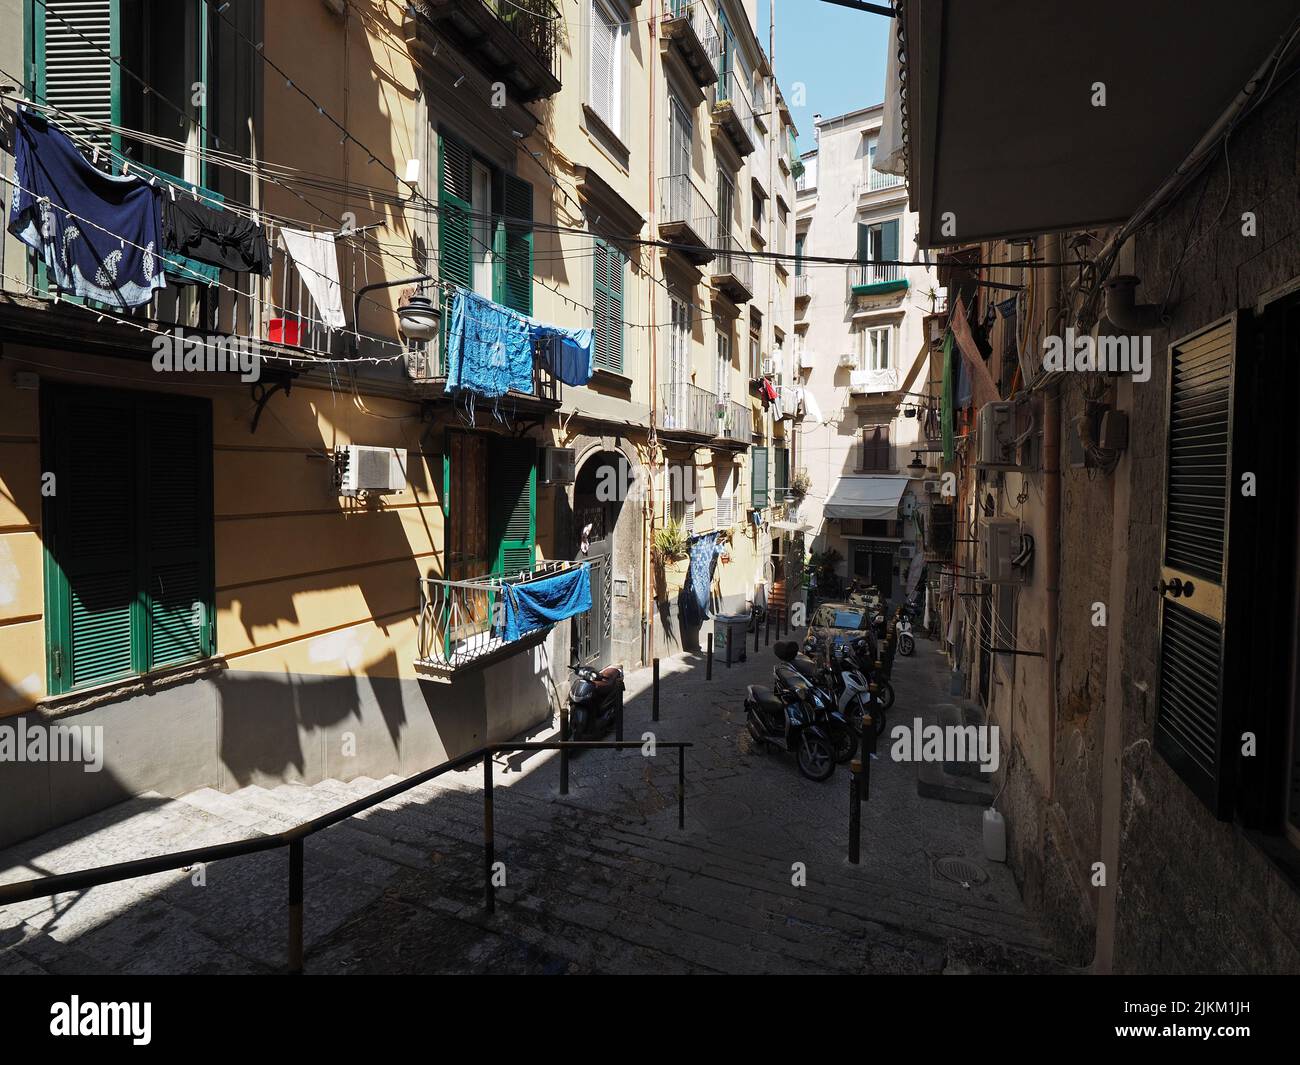 Typical street in Naples city center, steep and narrow with laundry hanging out to dry, and many scooters, Napoli, Campania, Italy Stock Photo